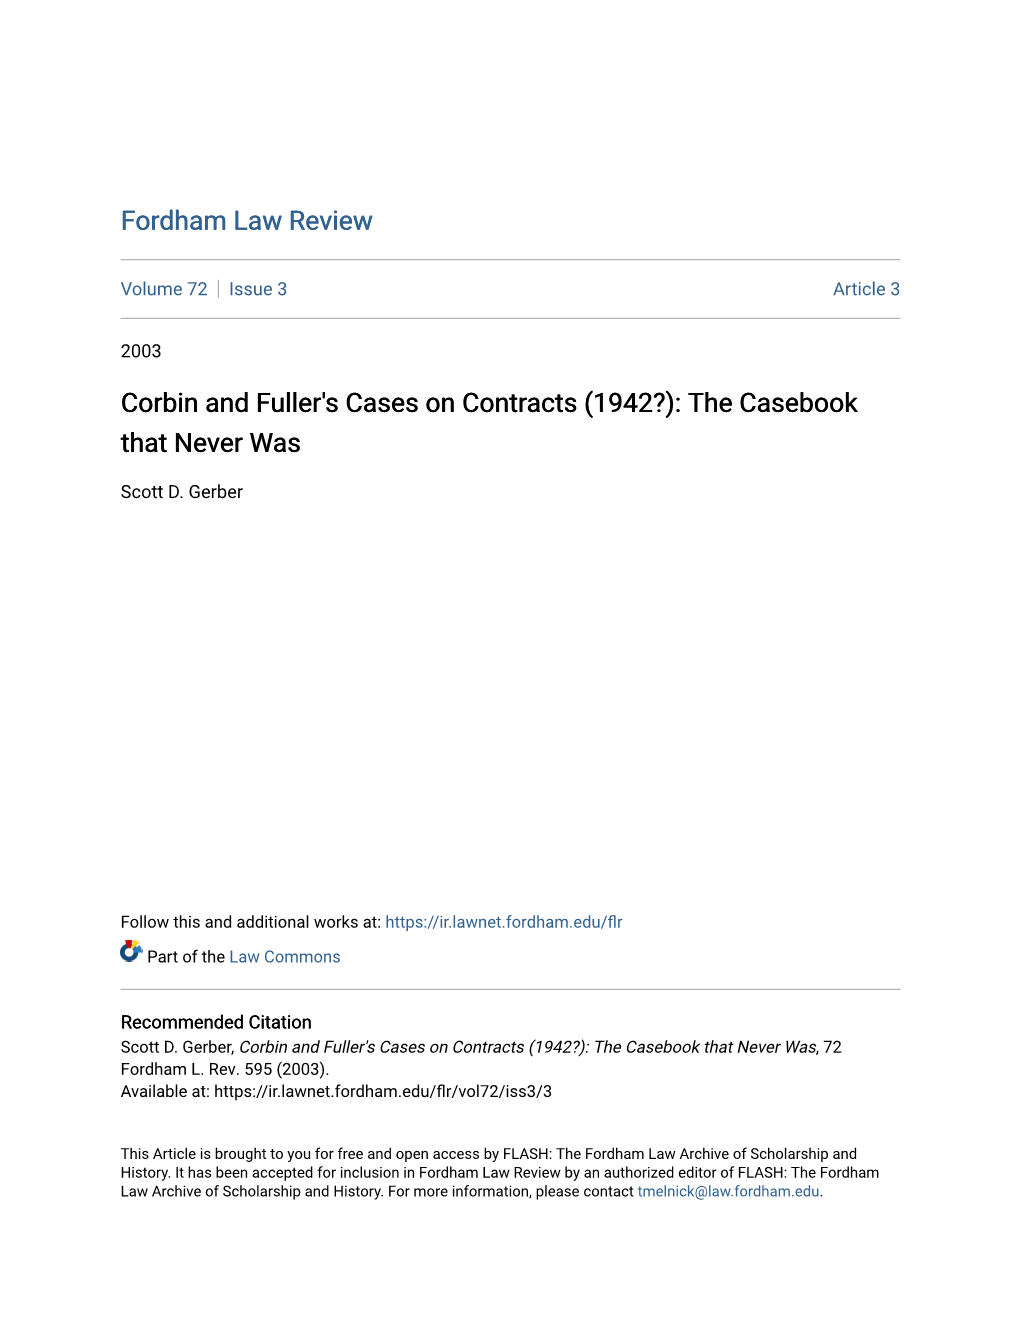 Corbin and Fuller's Cases on Contracts (1942?): the Casebook That Never Was